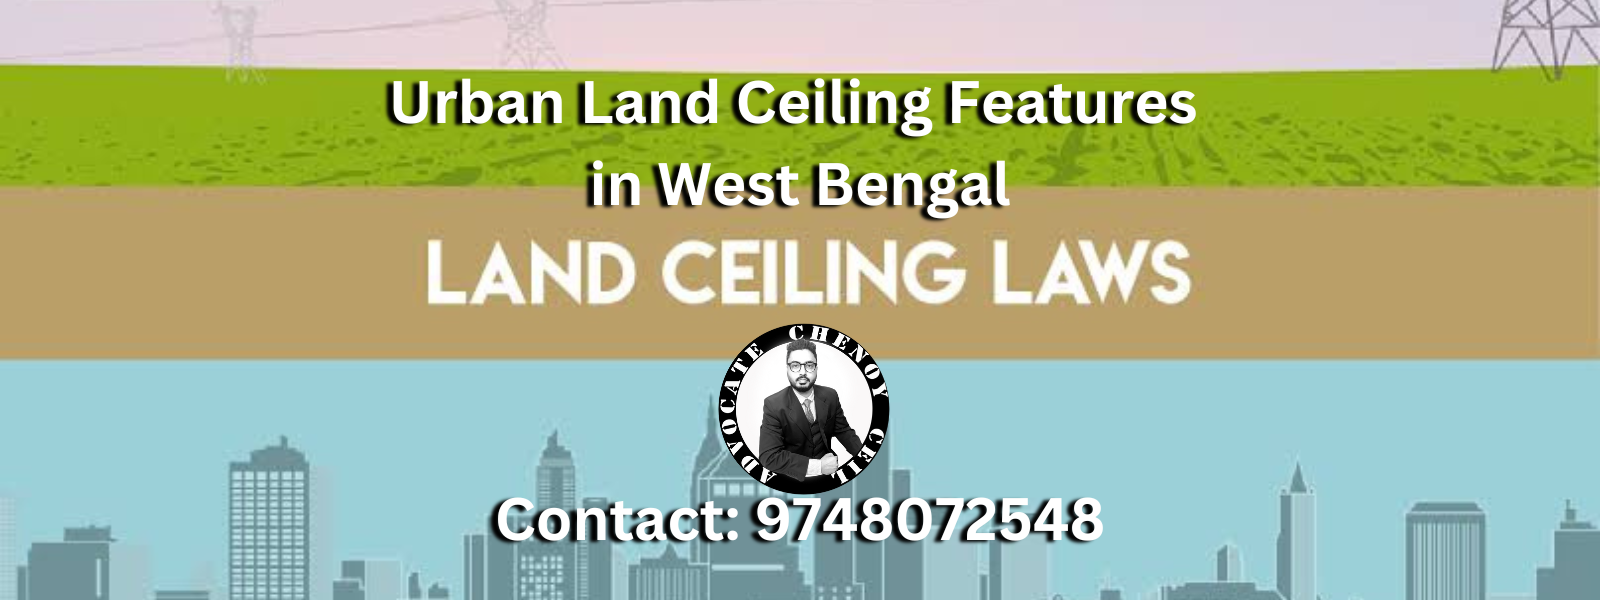 features of urban land ceiling